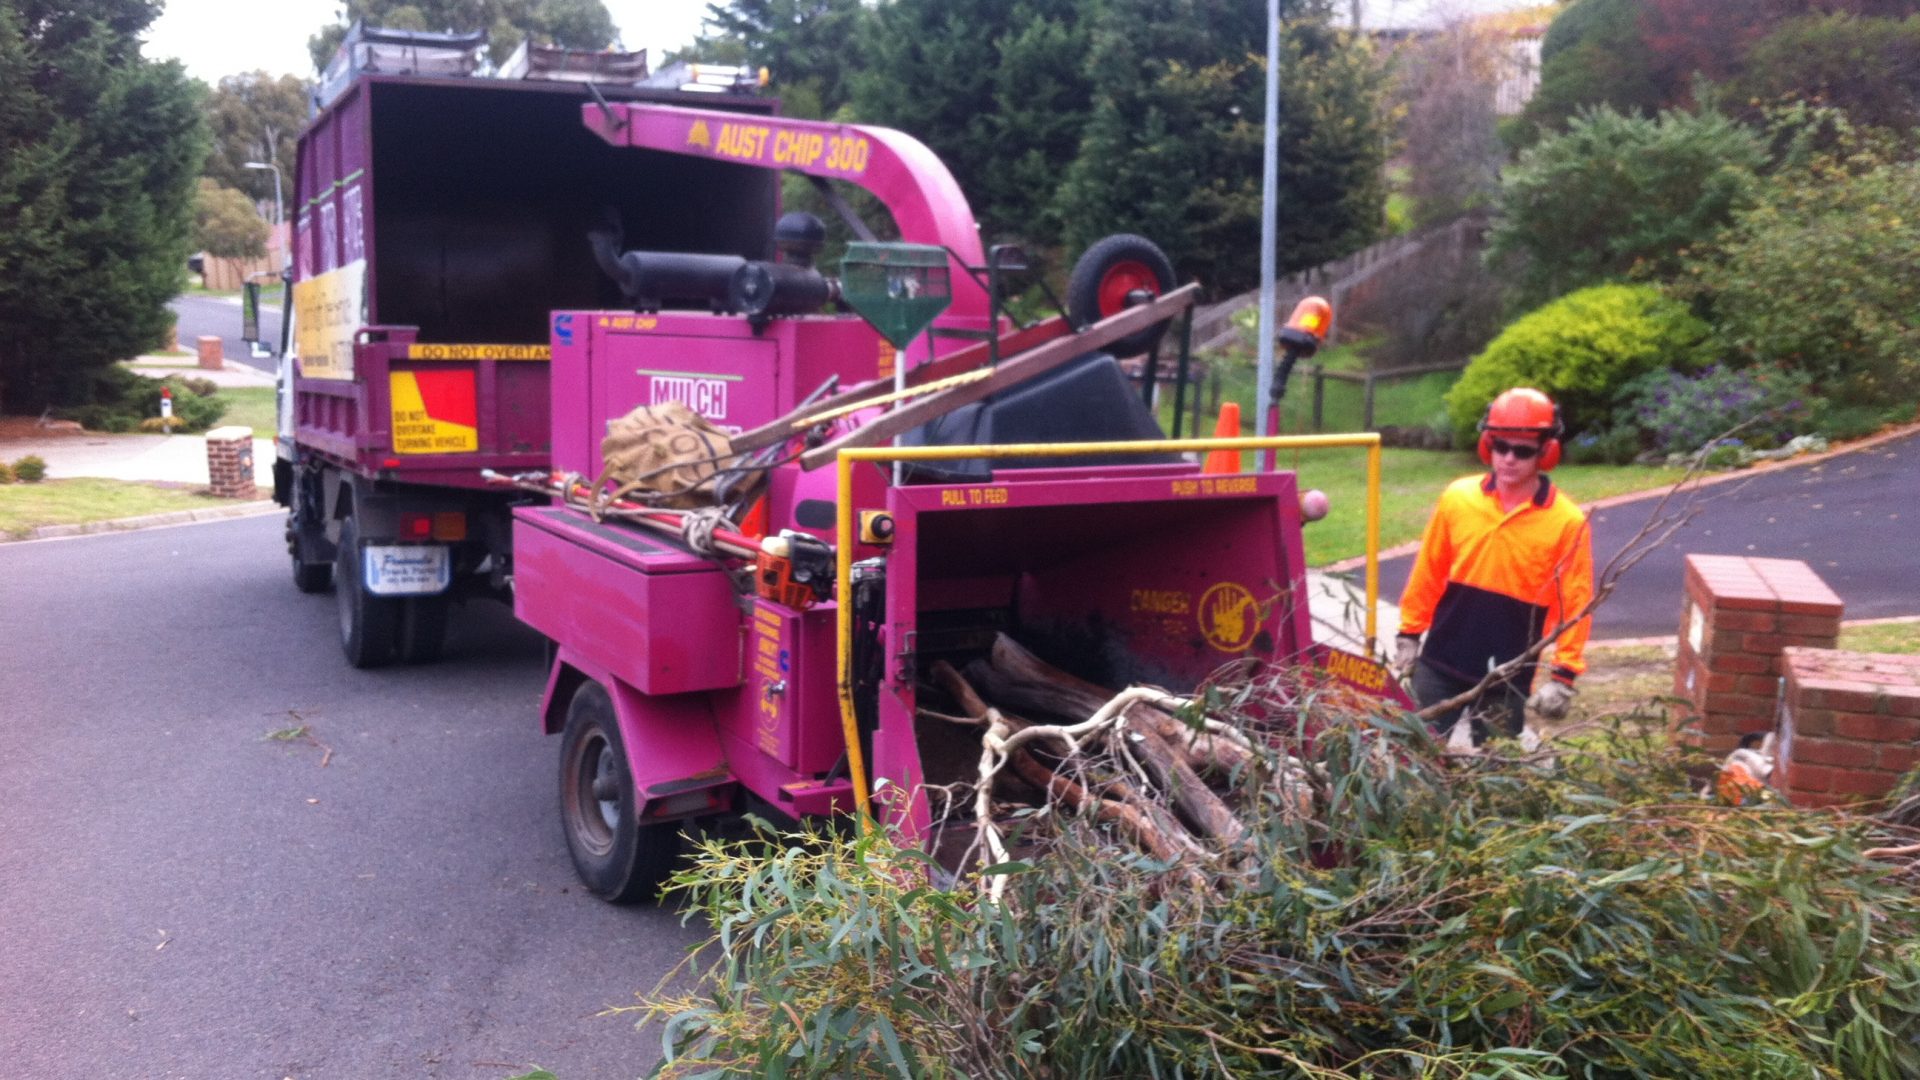 Tree Removal Service in Hastings - Lopping - Felling